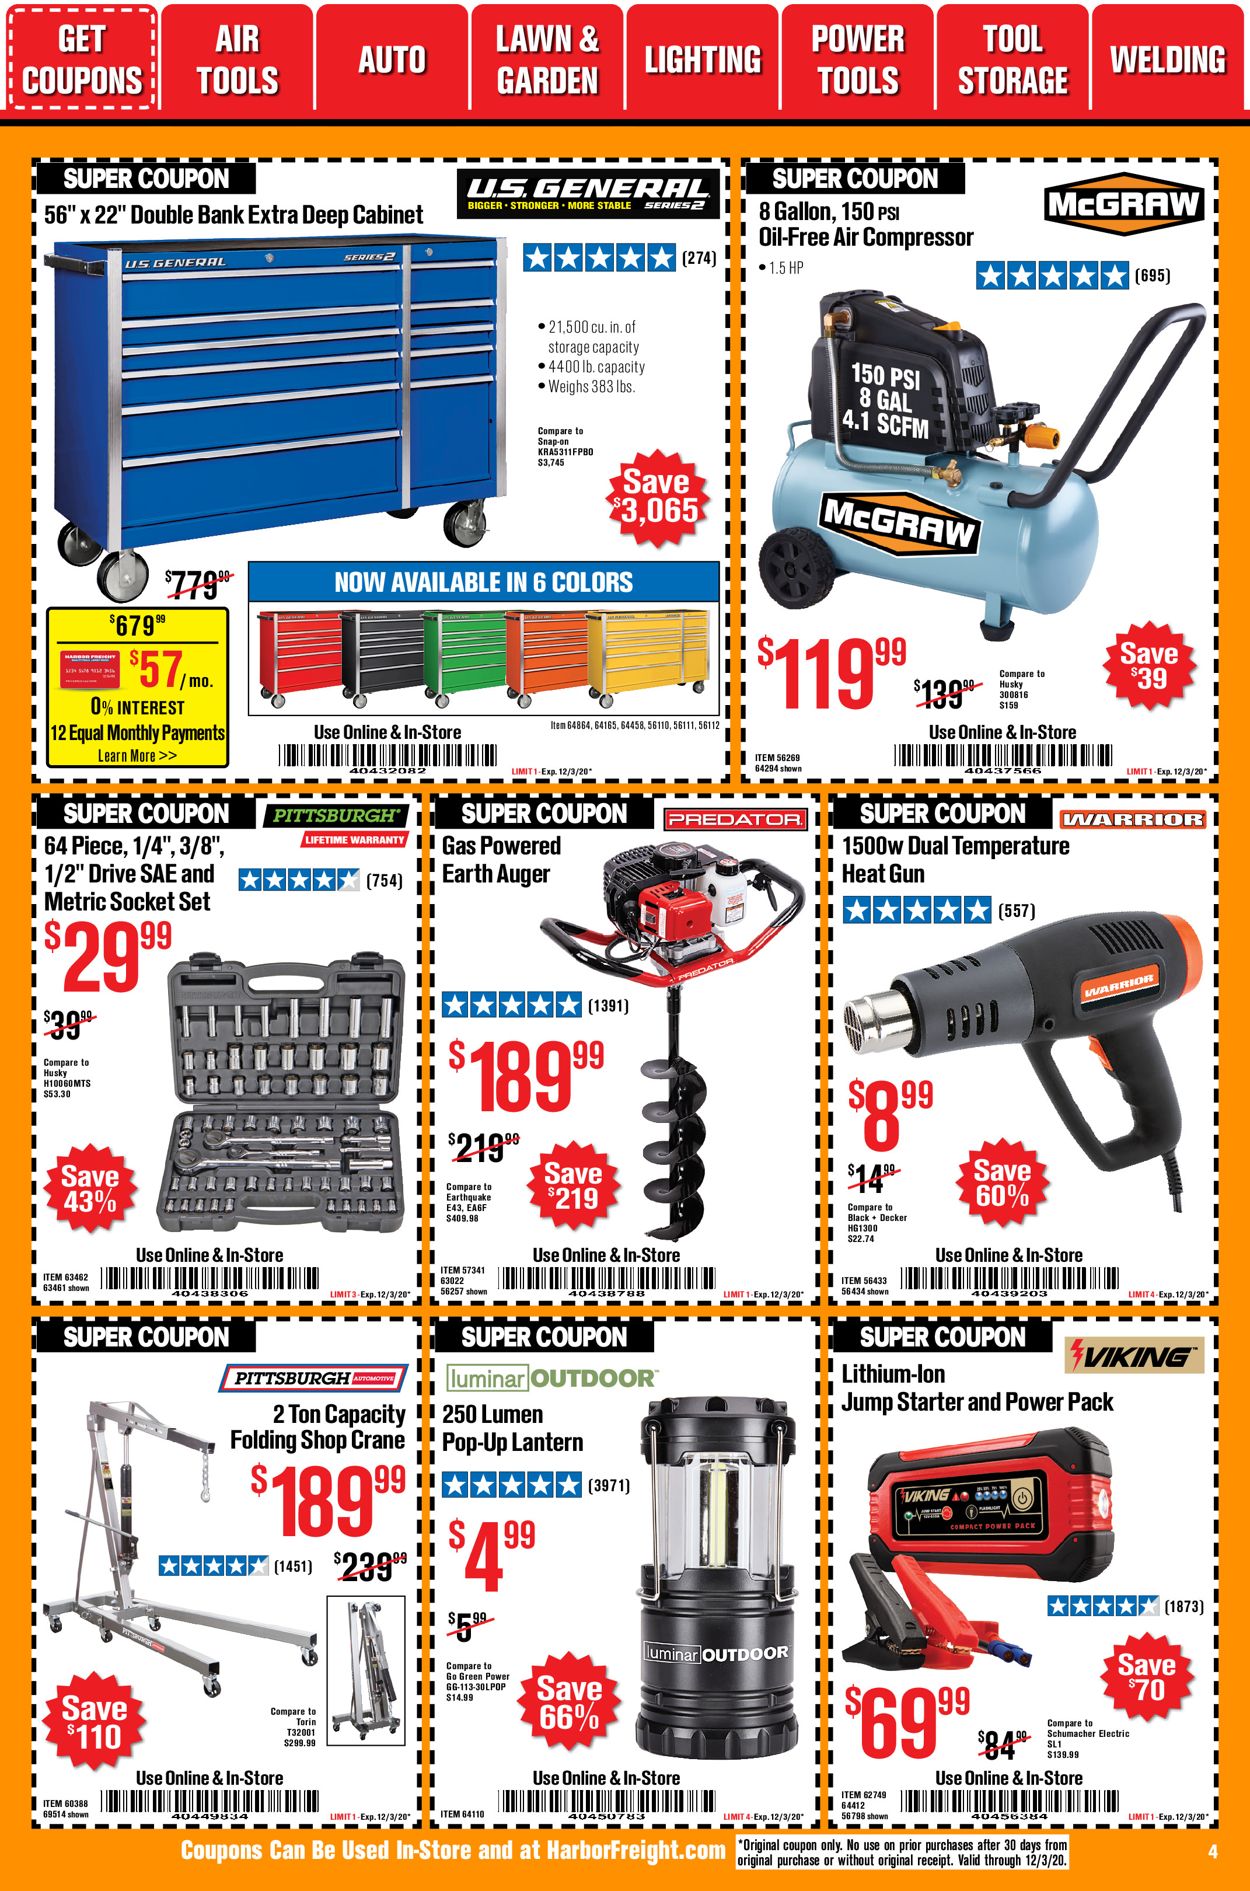 Harbor Freight Current weekly ad 11/01 11/30/2020 [4]